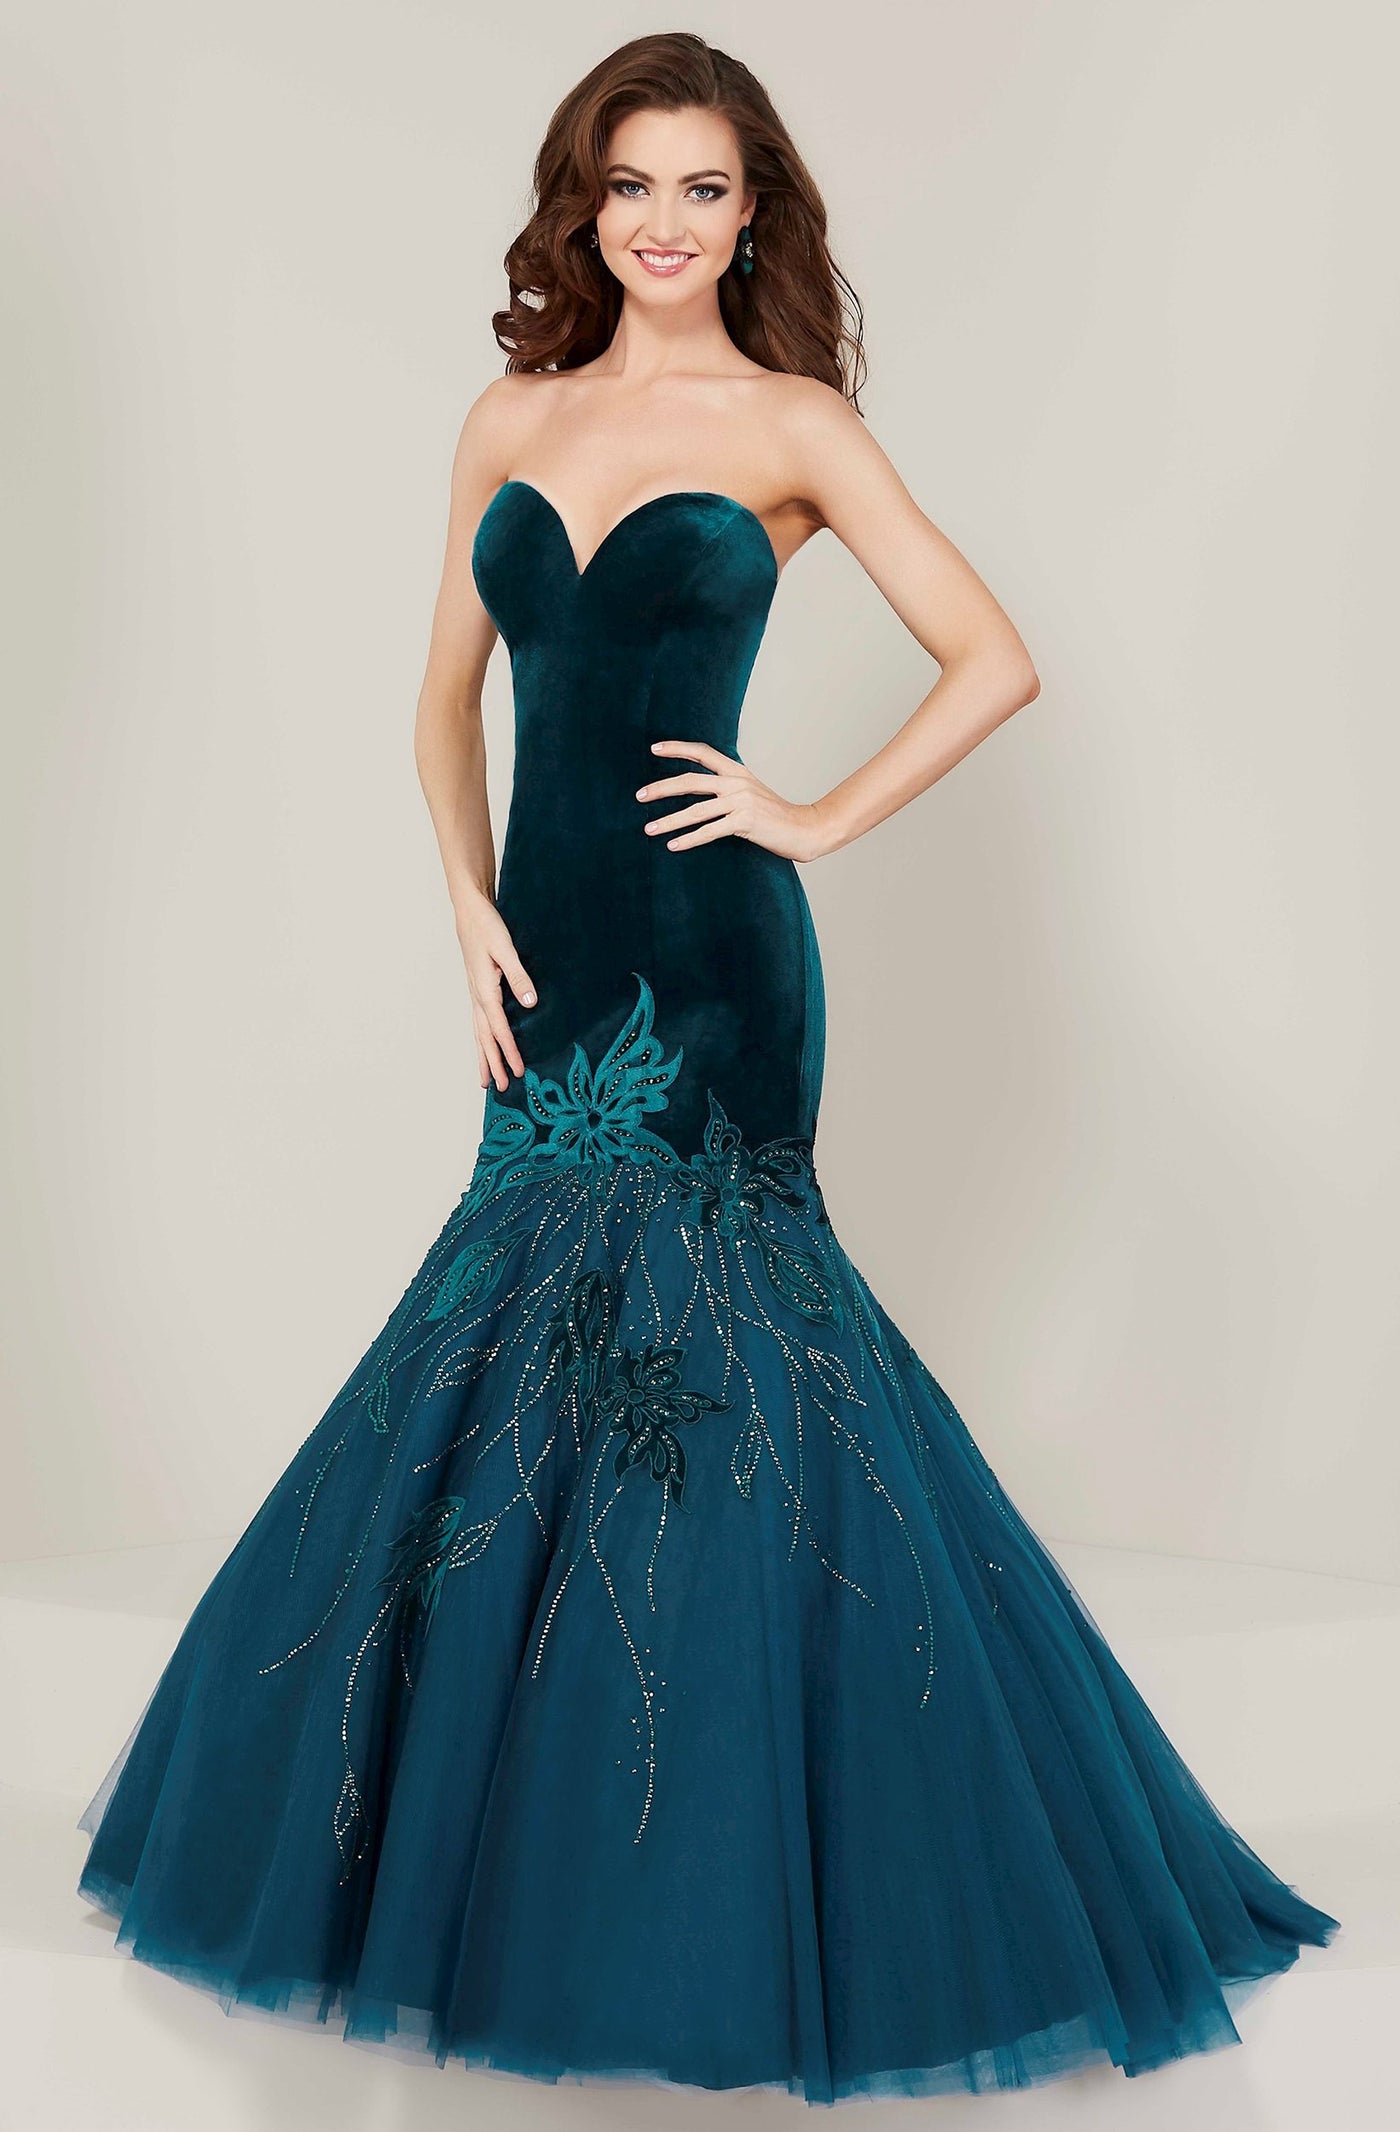 Tiffany Designs - 16330 Strapless Velvet Mermaid Gown In Blue and Green